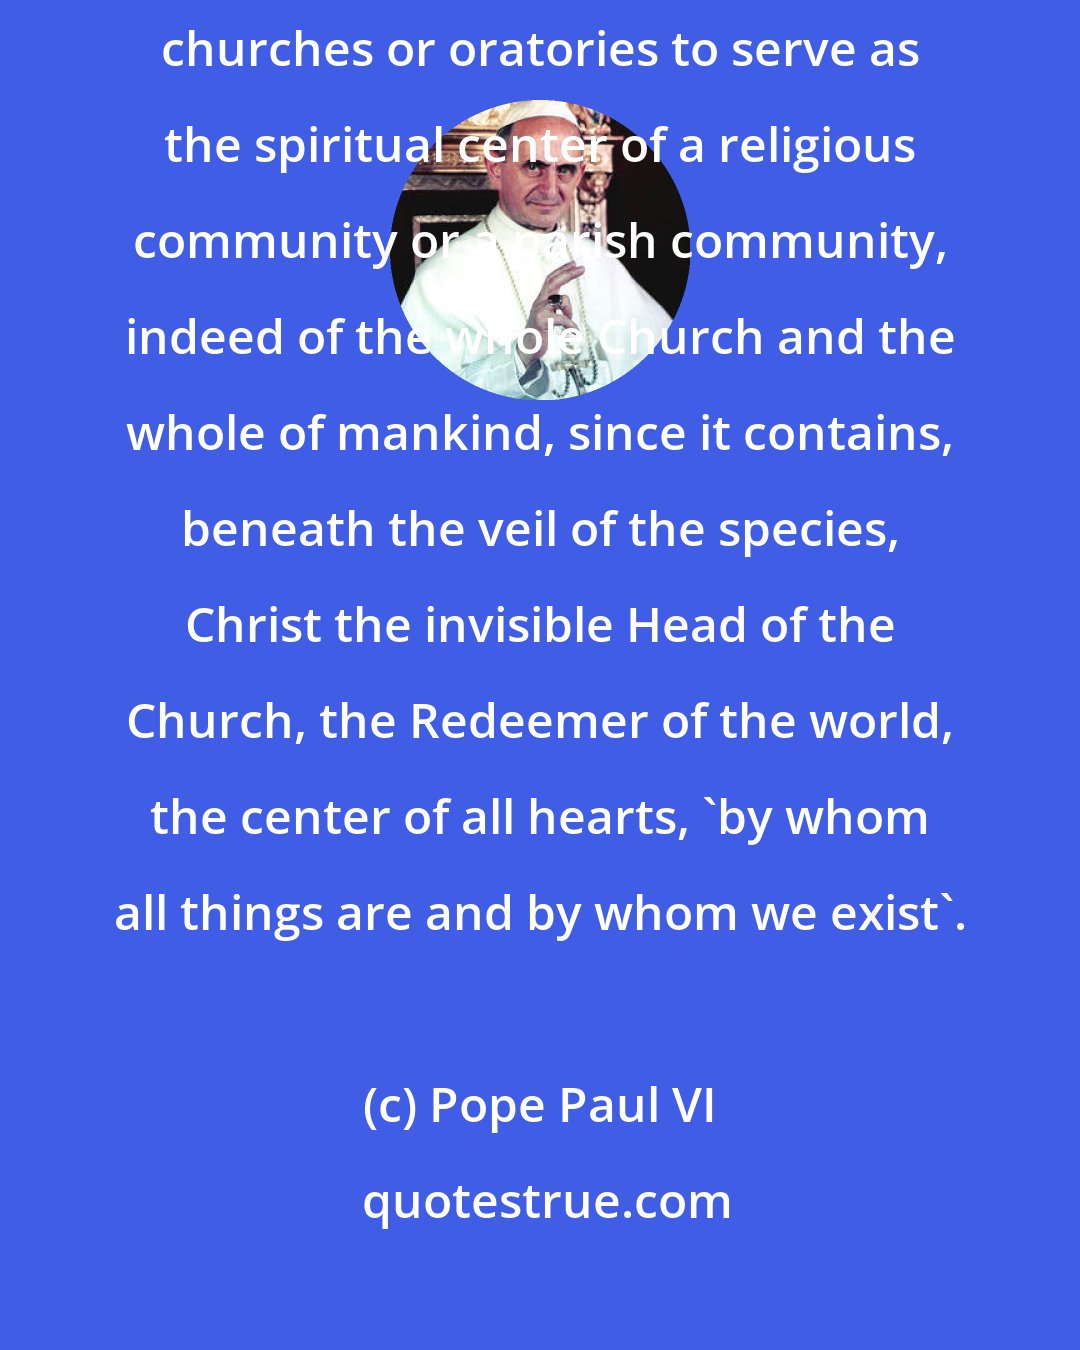 Pope Paul VI: You also realize, Venerable Brothers, that the Eucharist is reserved in churches or oratories to serve as the spiritual center of a religious community or a parish community, indeed of the whole Church and the whole of mankind, since it contains, beneath the veil of the species, Christ the invisible Head of the Church, the Redeemer of the world, the center of all hearts, 'by whom all things are and by whom we exist'.